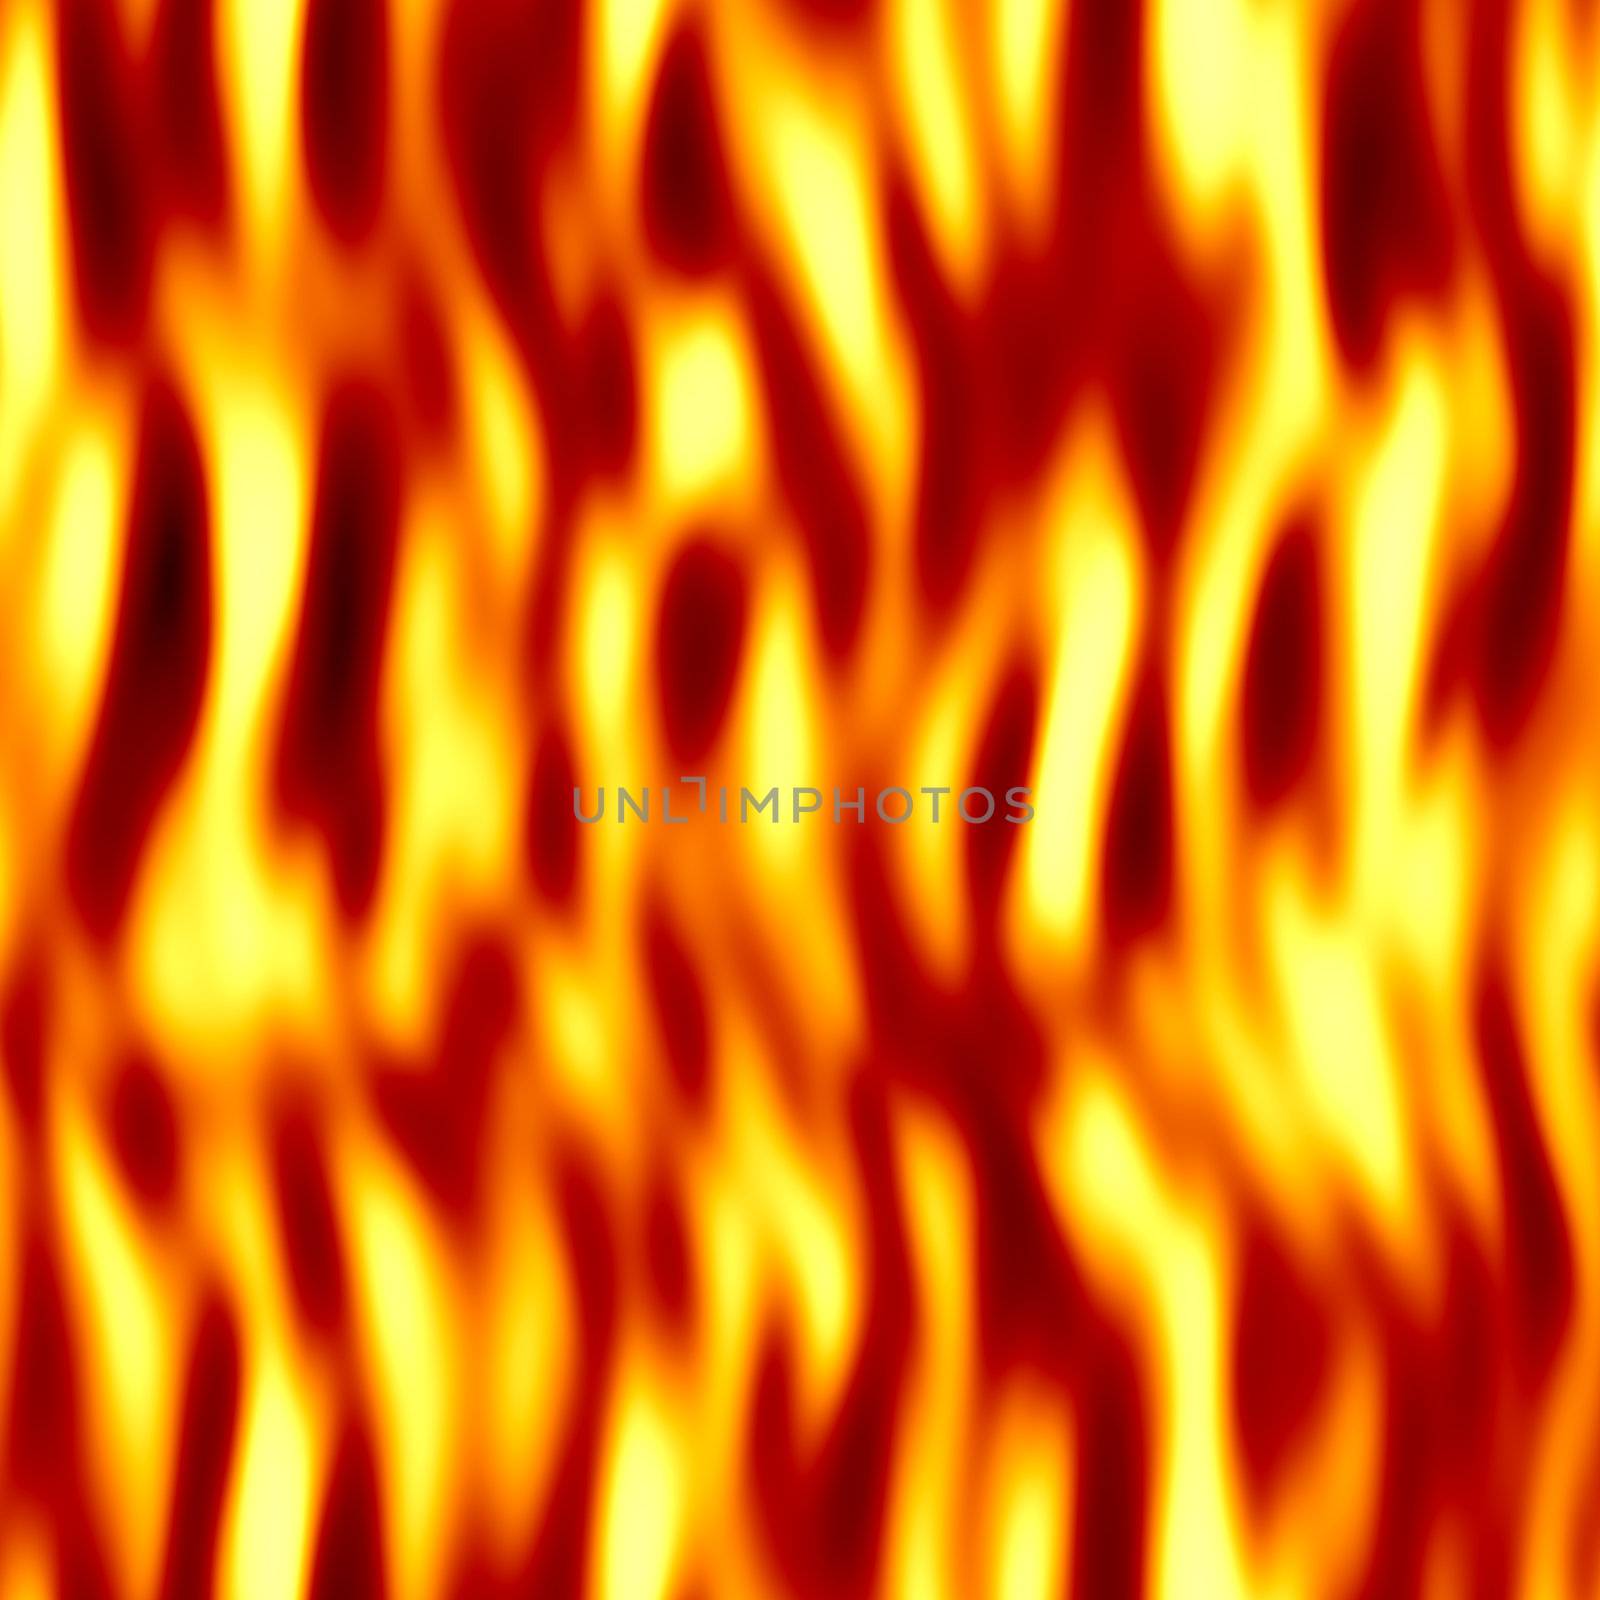 fire background, will tile seamlessly as a pattern

